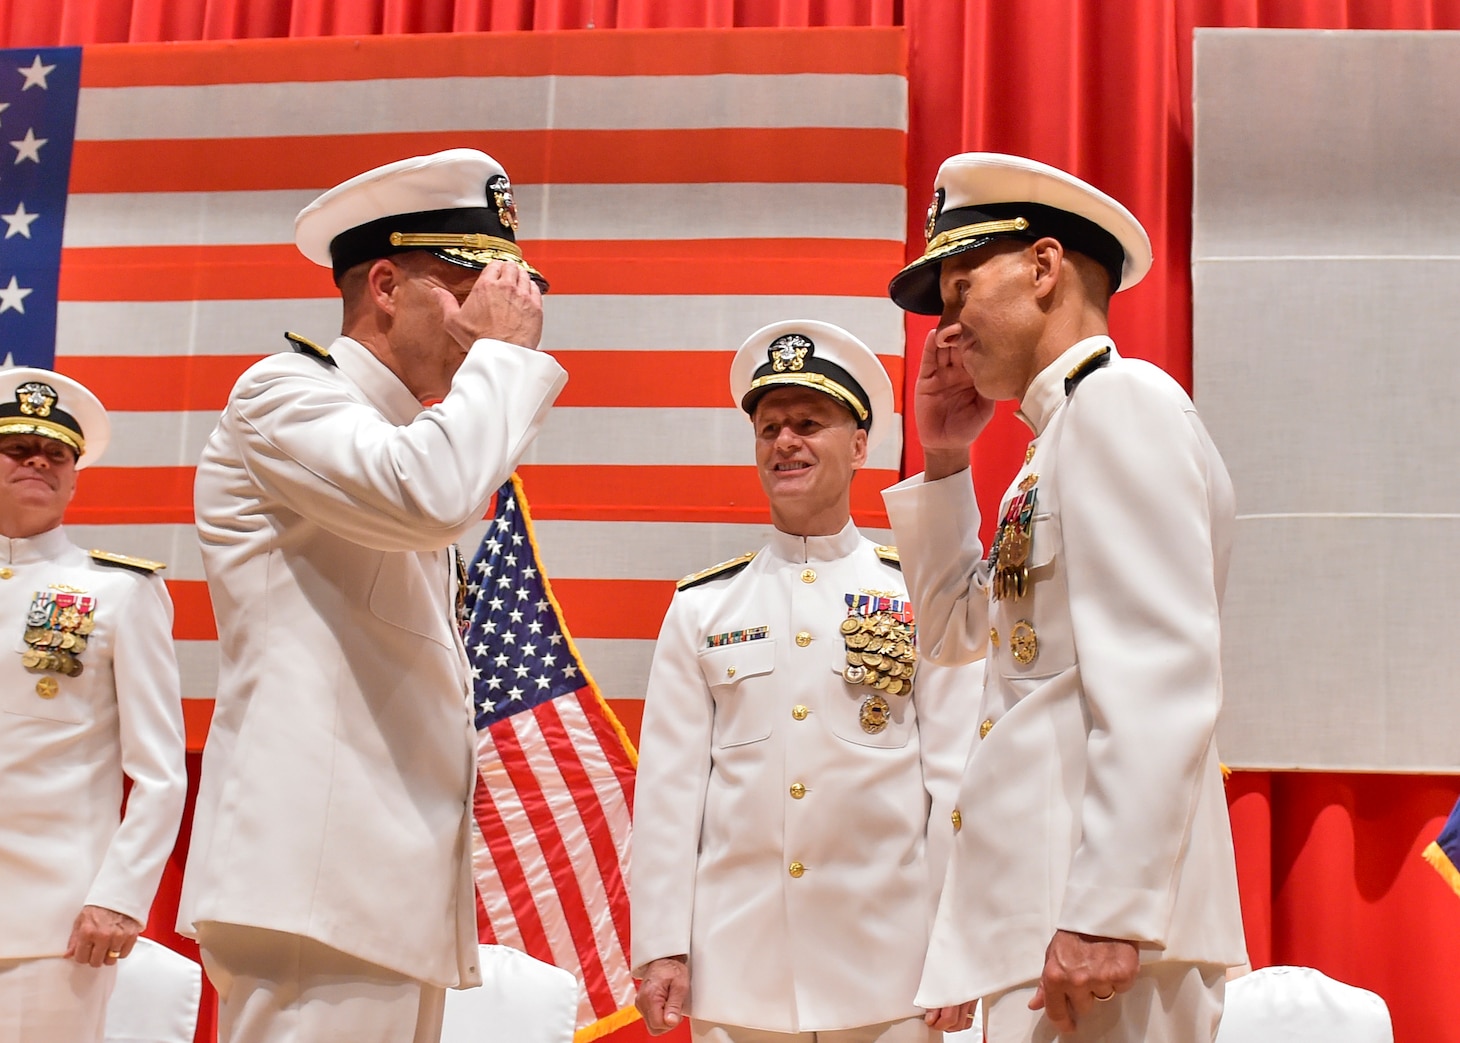 FLEET ACTIVITIES YOKOSUKA, Japan (Aug. 17, 2016) Rear Adm. William R. Merz and Rear Adm. Richard Correll exchange salutes during their change of command ceremony. Correll relieved Merz as the 45th commander of Submarine Group 7. (U.S. Navy photo by Mass Communication Specialist 2nd Class Brian G. Reynolds)
